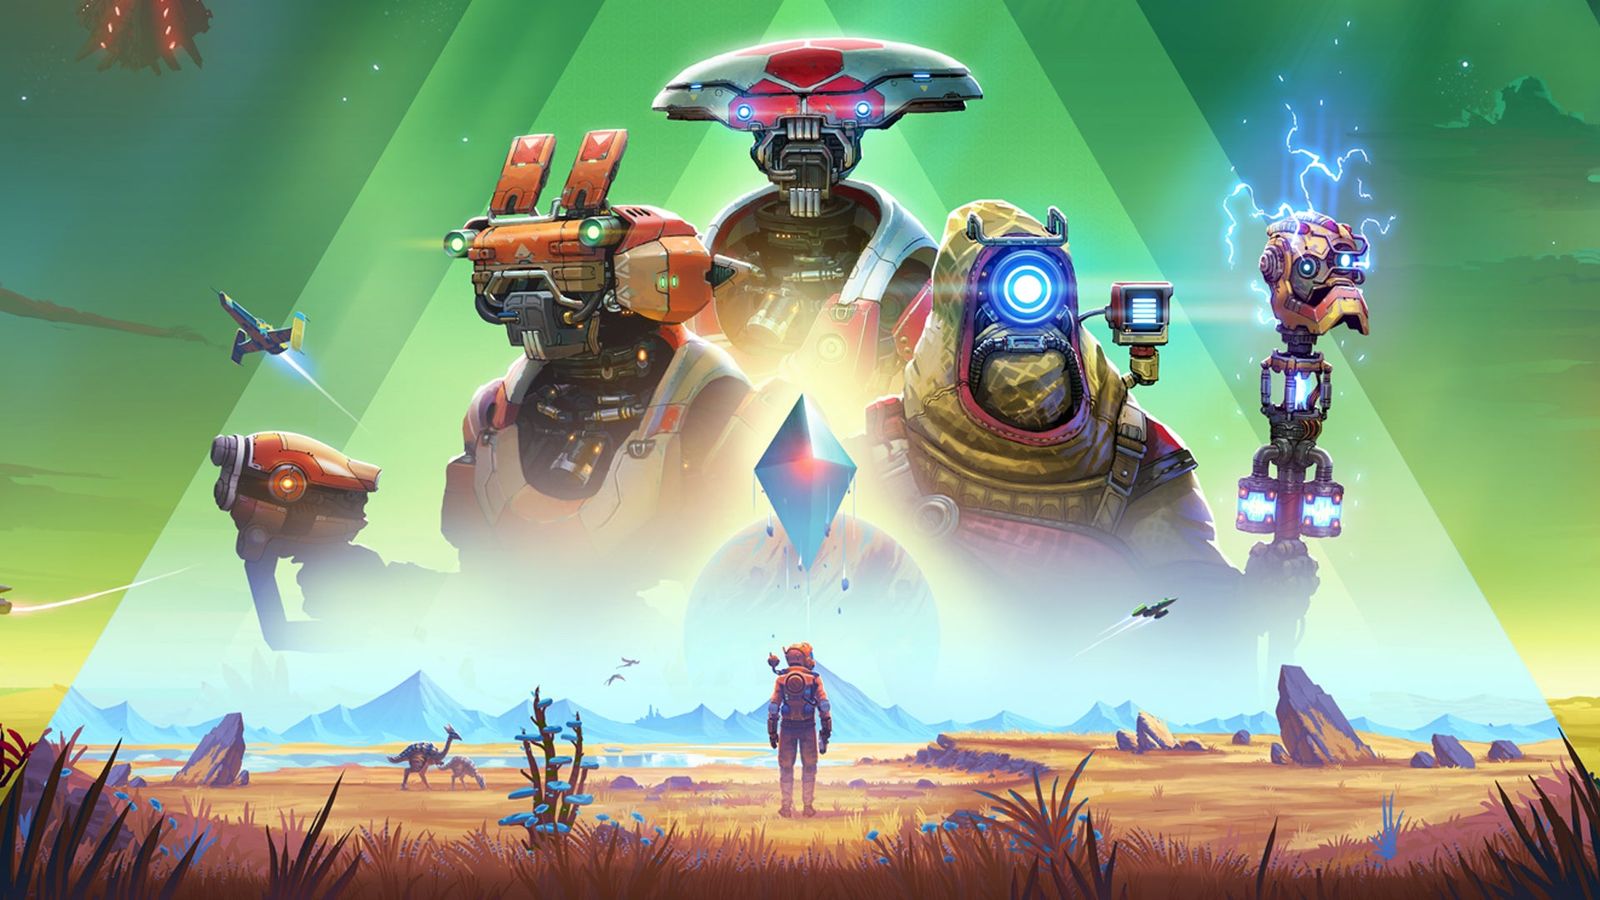 No Man's Sky Echoes robots in sky with space explorer in foreground